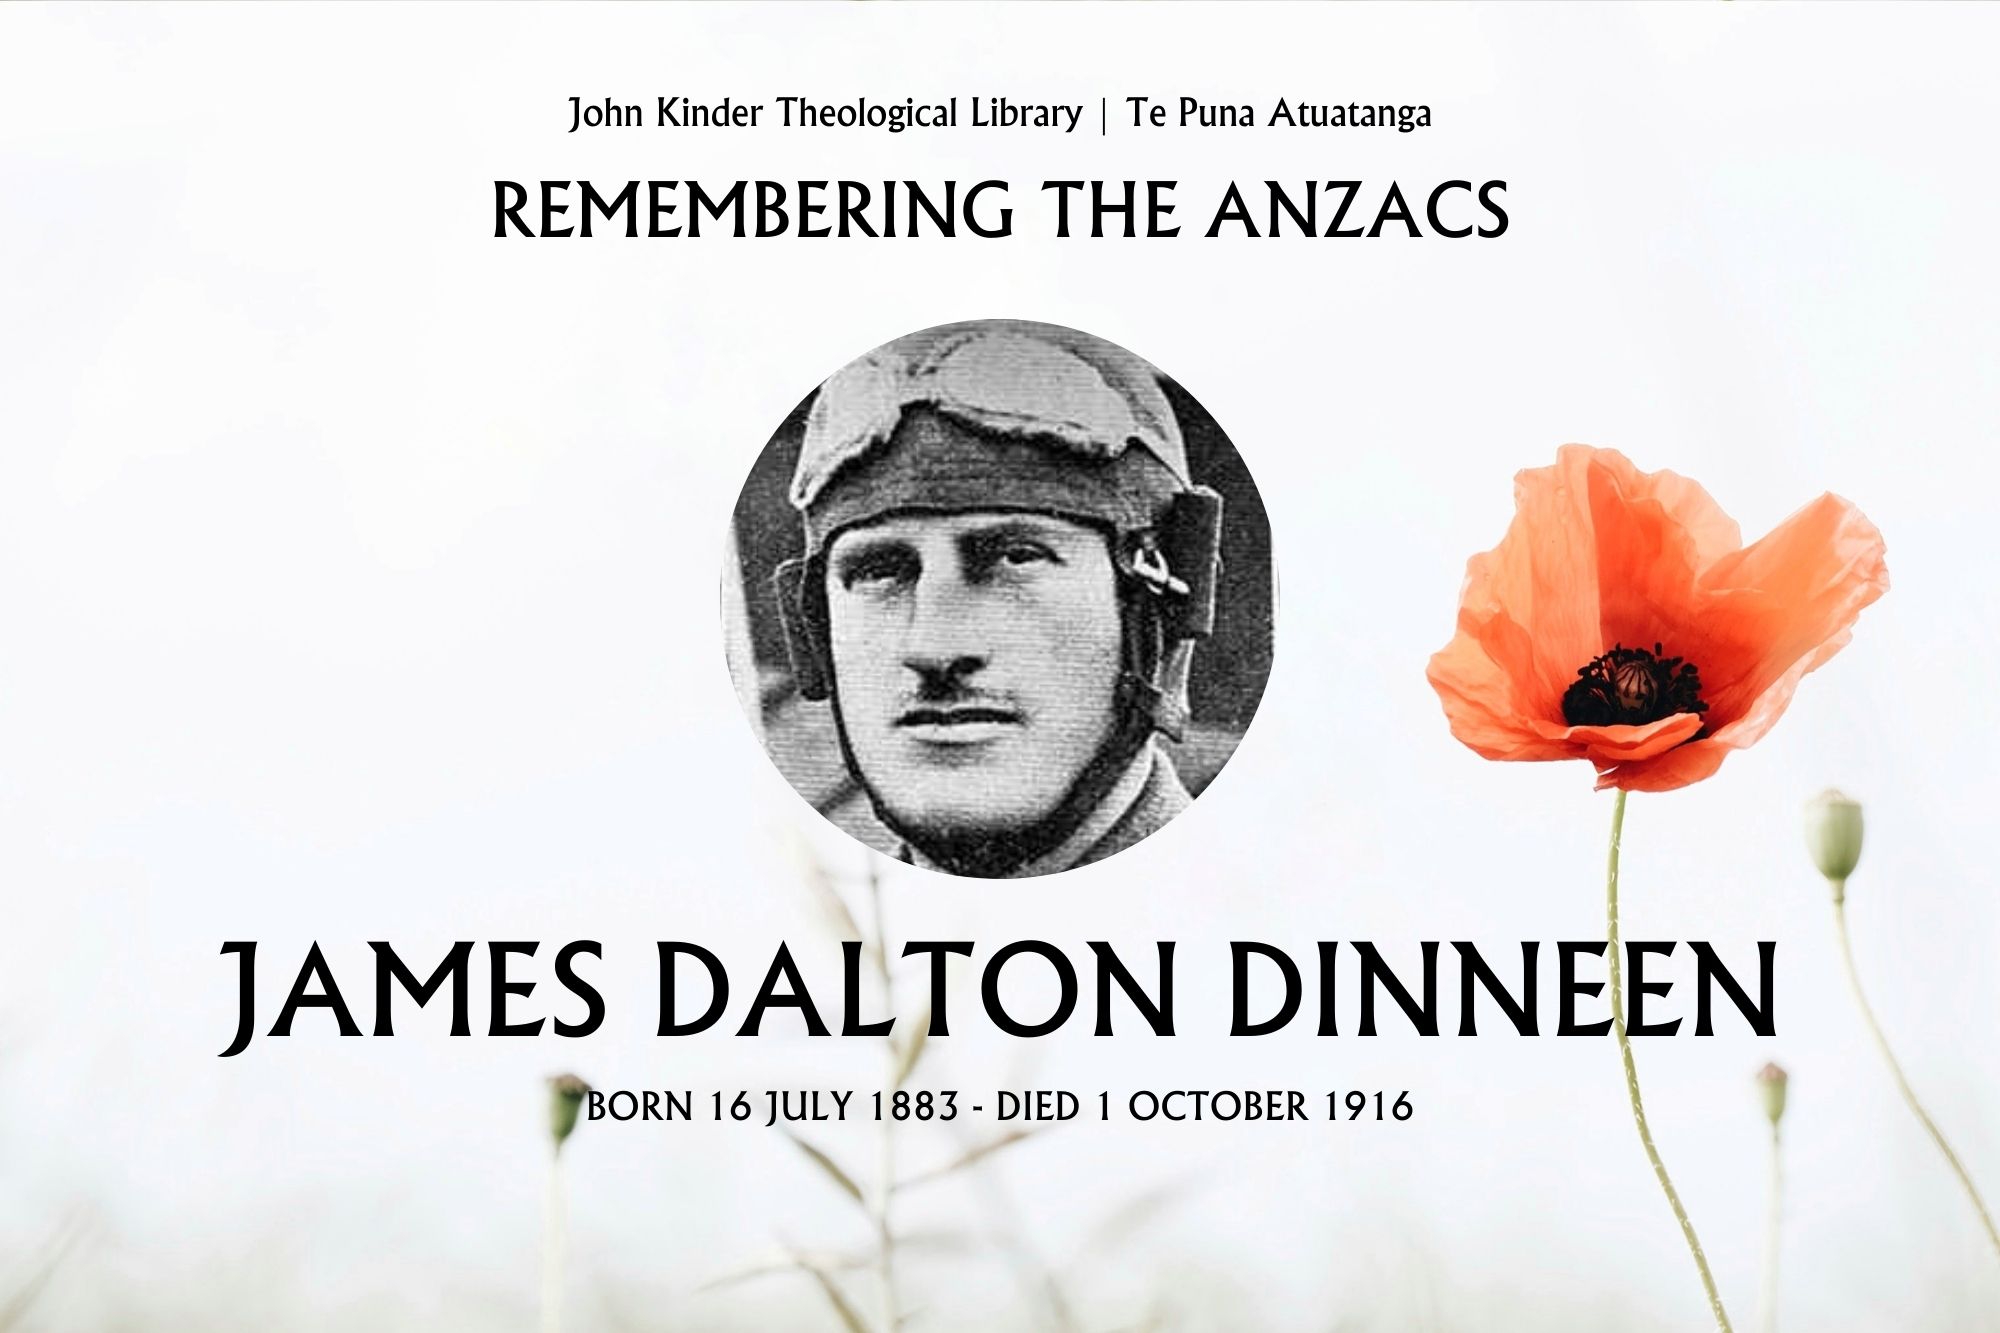 Remembering the ANZACs - John Kinder Theological Library - St John's College - James Dalton Dinneen